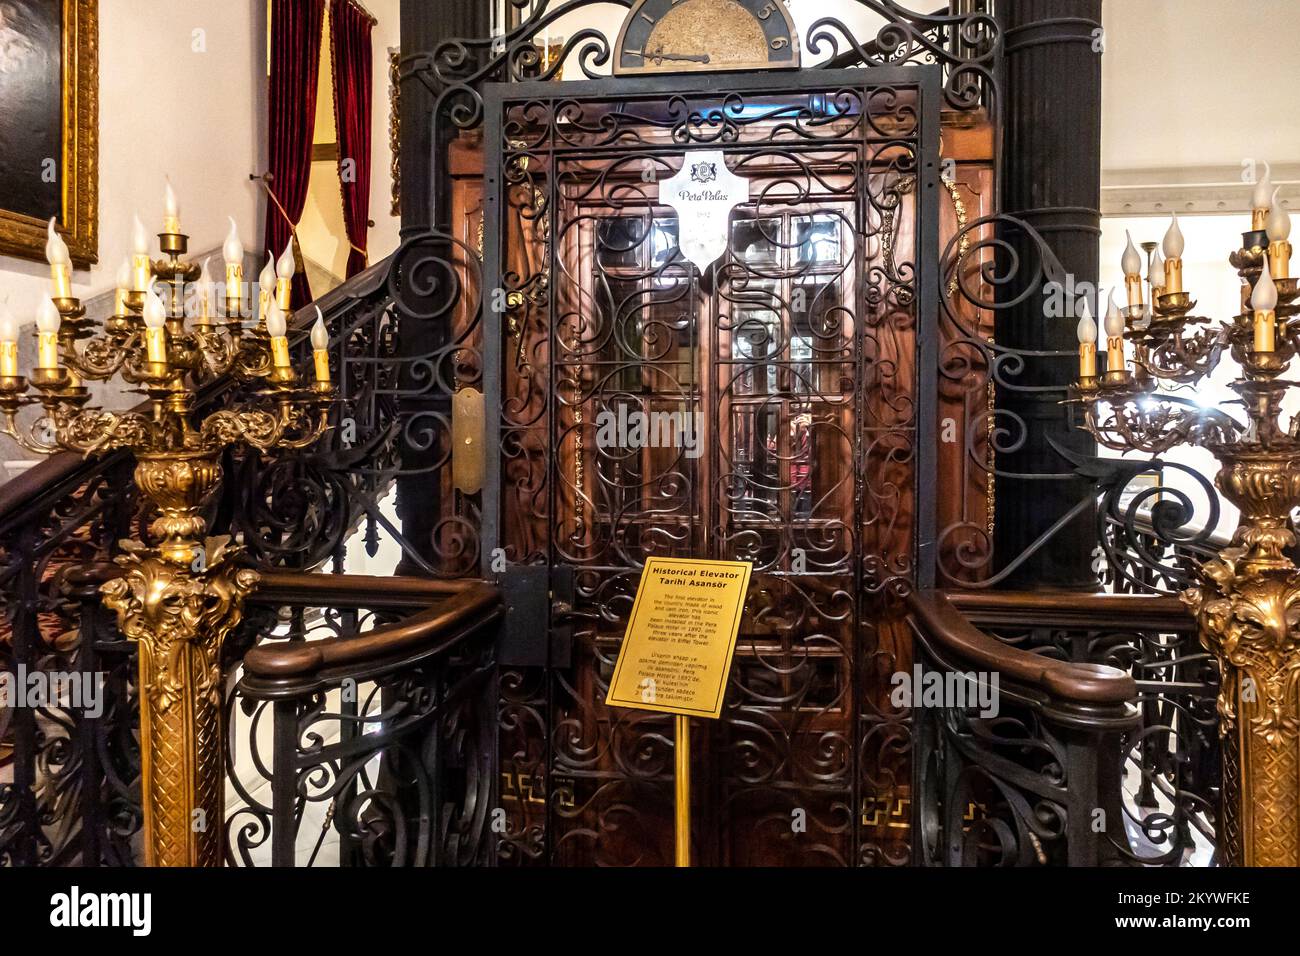 Tarihî Asansör - historic elevator in Pera Palace hotel, installed in 1892. First Turkish elevator made of wood and cast iron. Istanbul Stock Photo